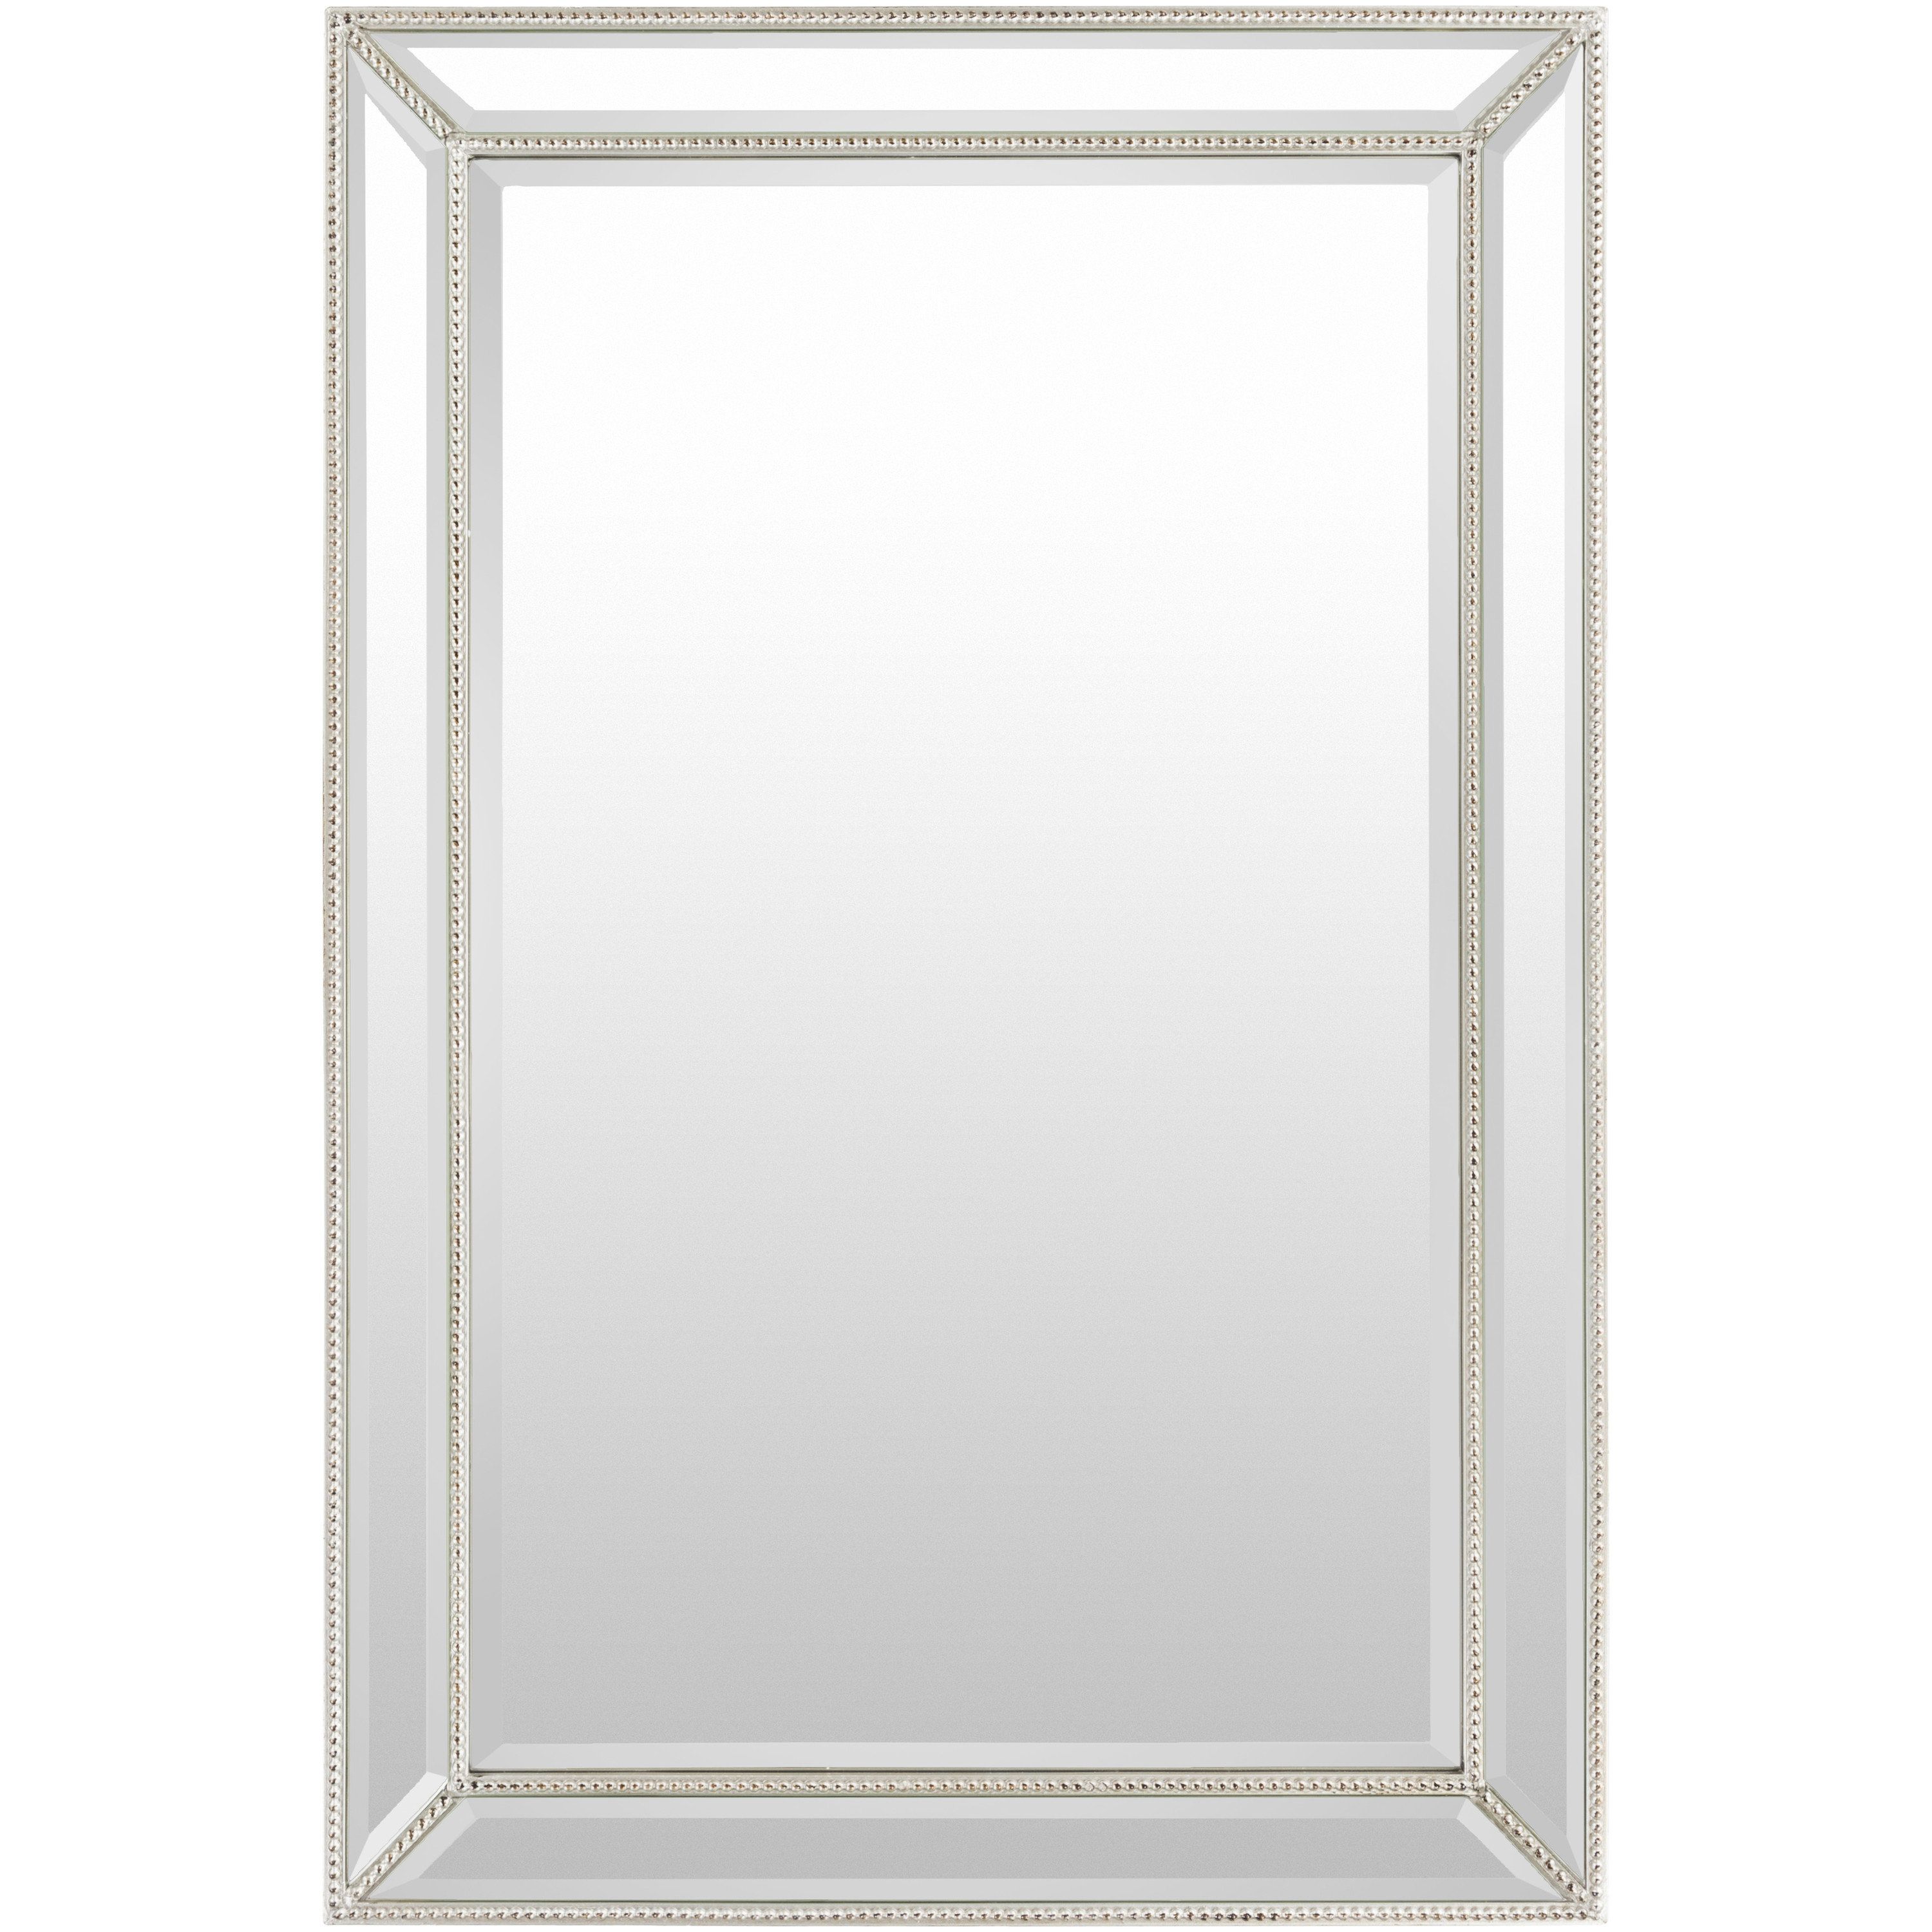 Vertical Wall Mirrors You'll Love In 2019 | Wayfair Intended For Longwood Rustic Beveled Accent Mirrors (View 18 of 20)